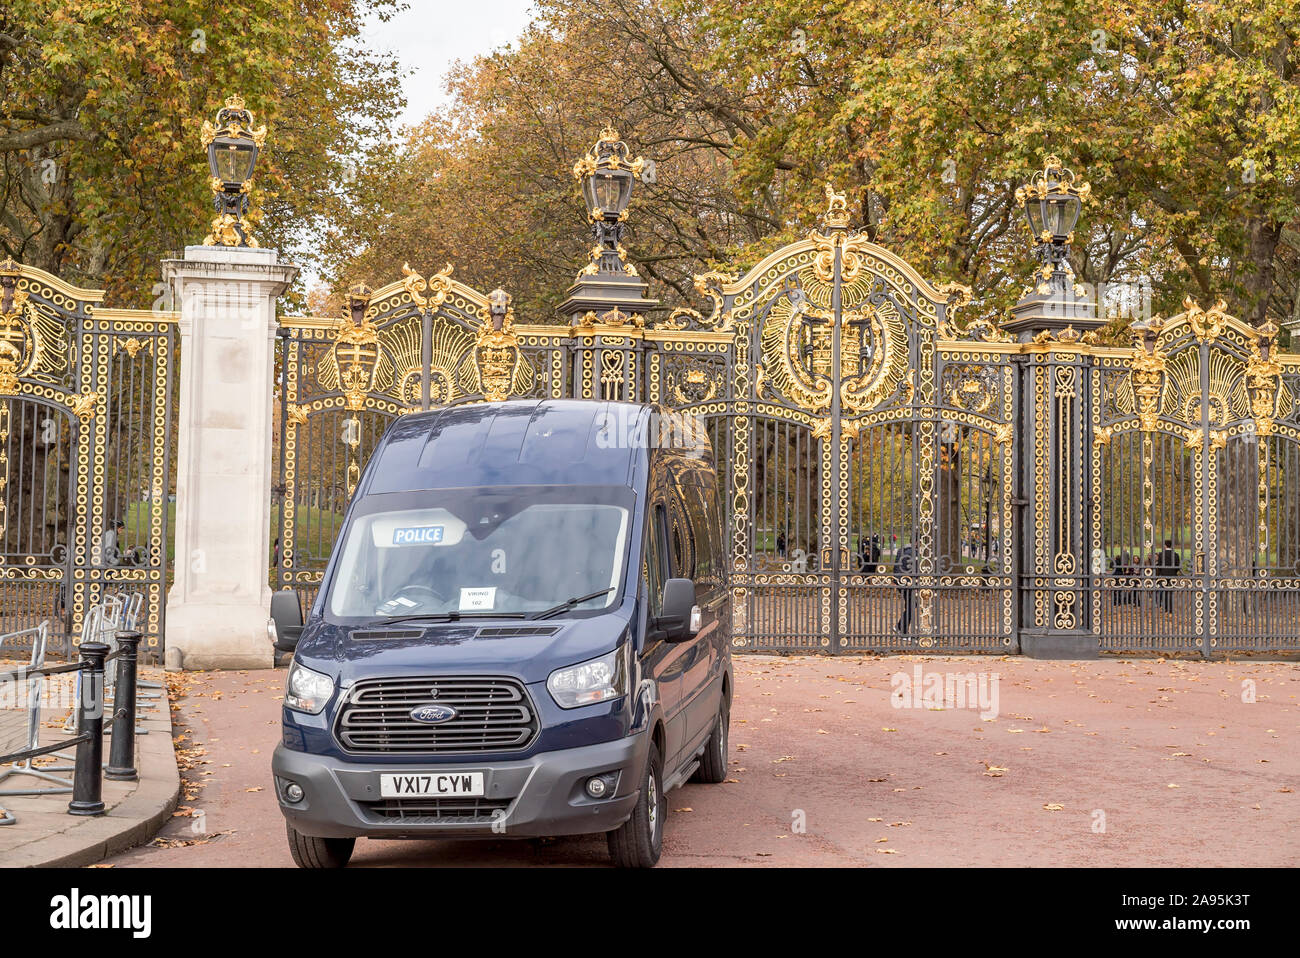 View of Canada Gate - gates to the royal park, The Green Park, with a police van parked directly outside. Royal parks, London, UK, daytime, no people. Stock Photo